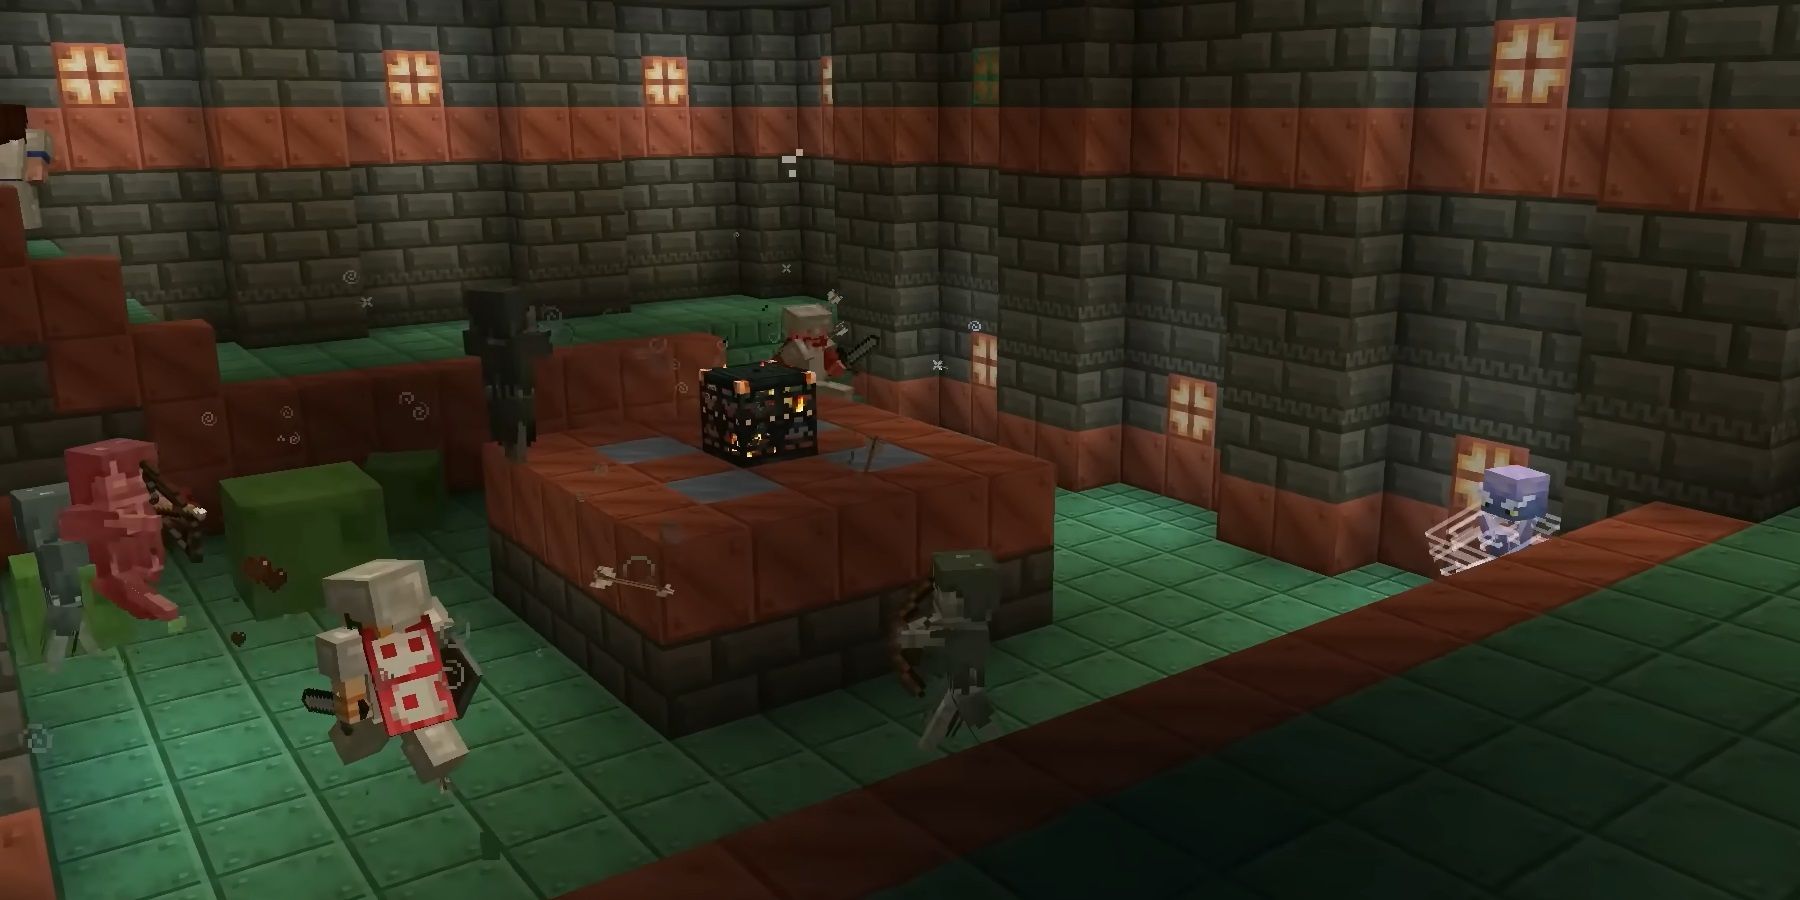 Minecraft combat against mobs in the trial chamber